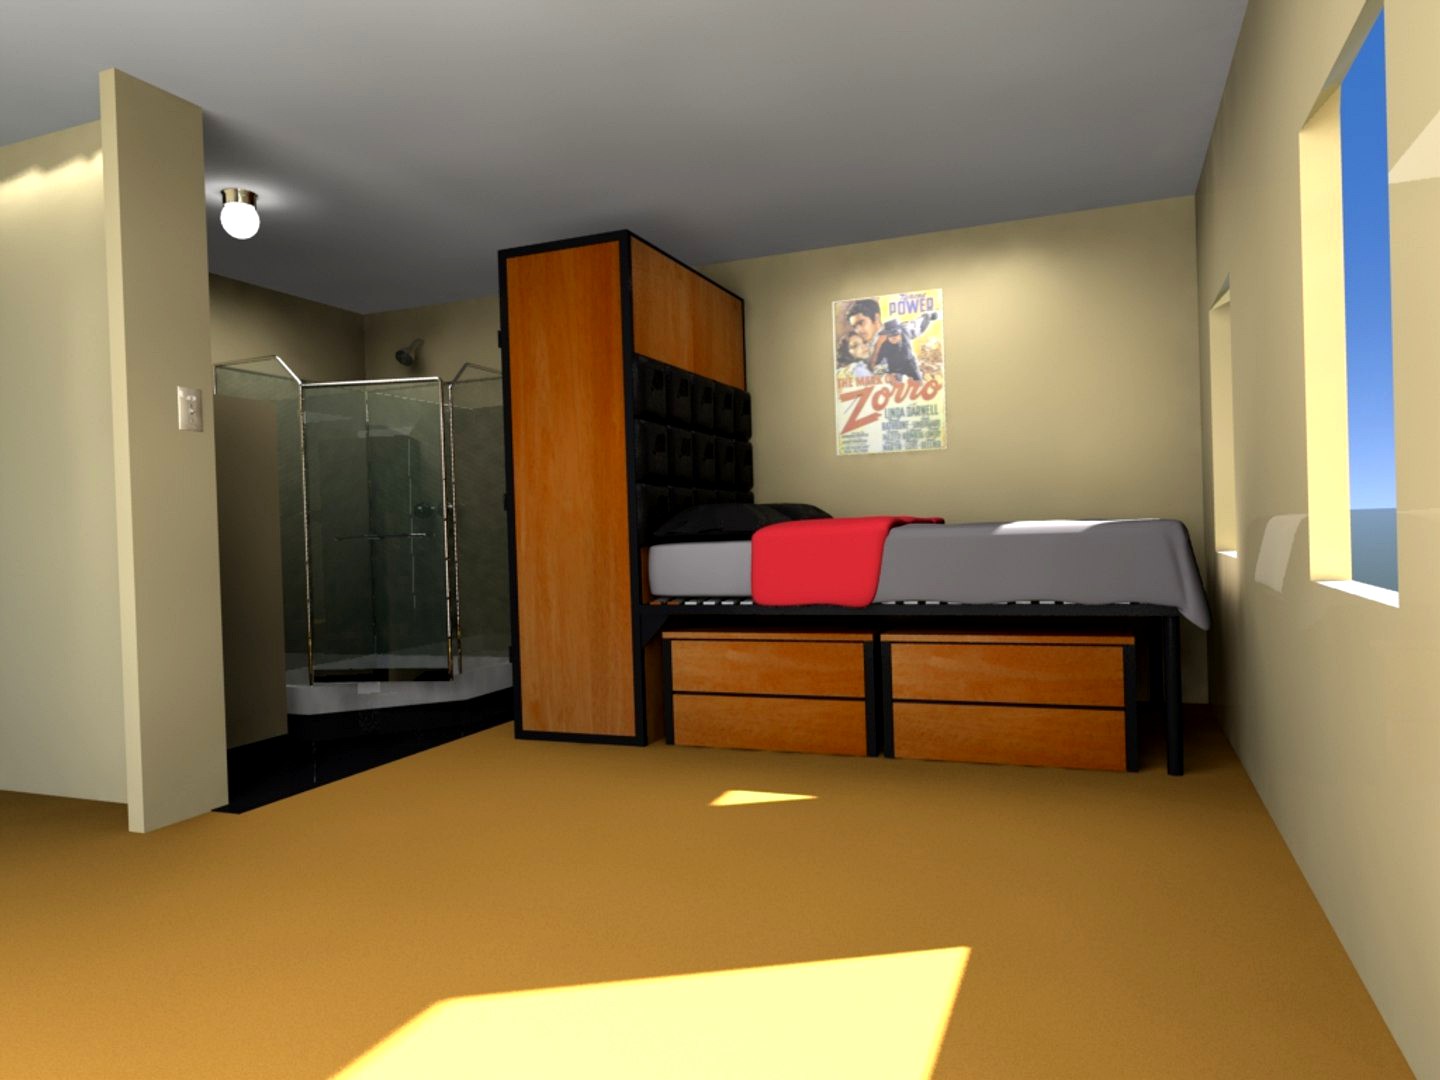 Dorm Room with Bed, Wardrobe and Shower